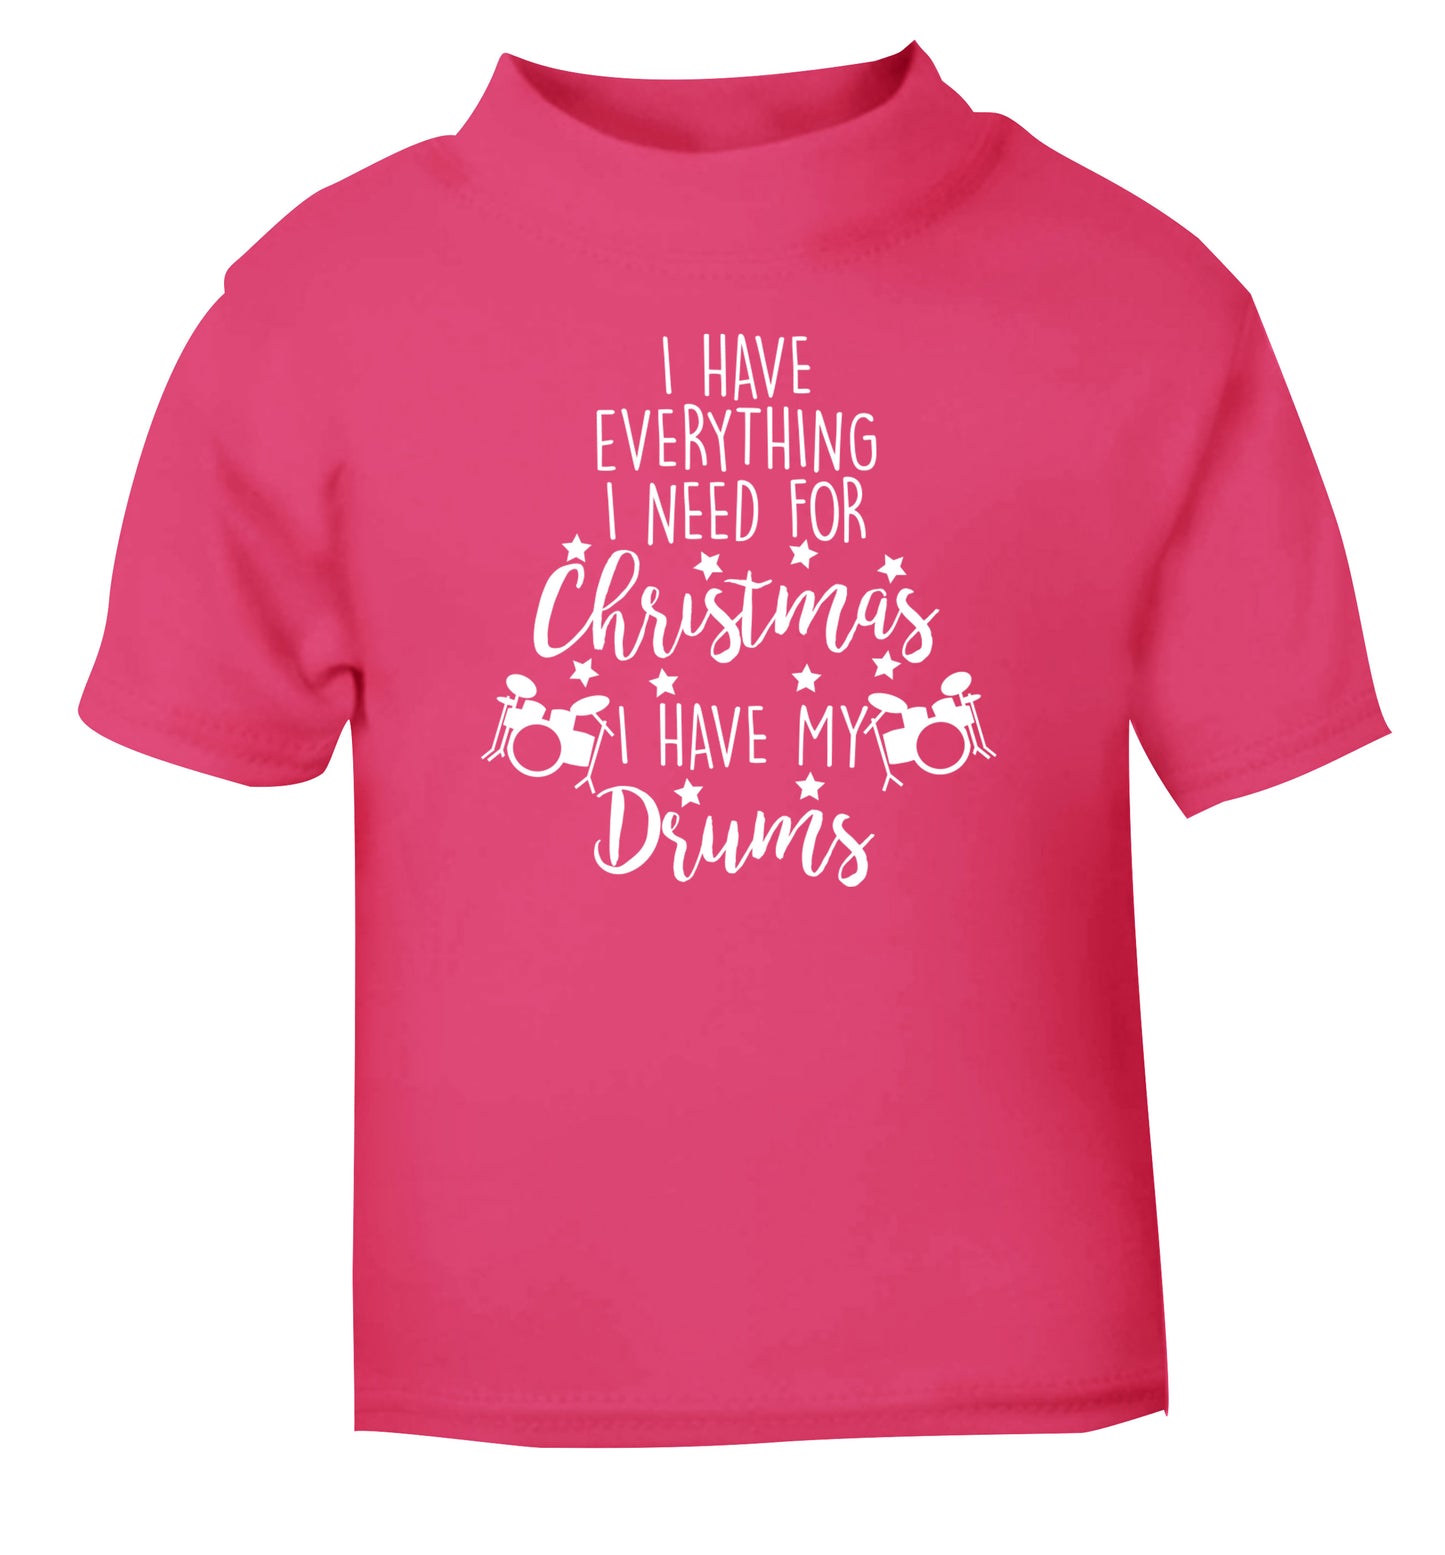 I have everything I need for Christmas I have my drums! pink Baby Toddler Tshirt 2 Years